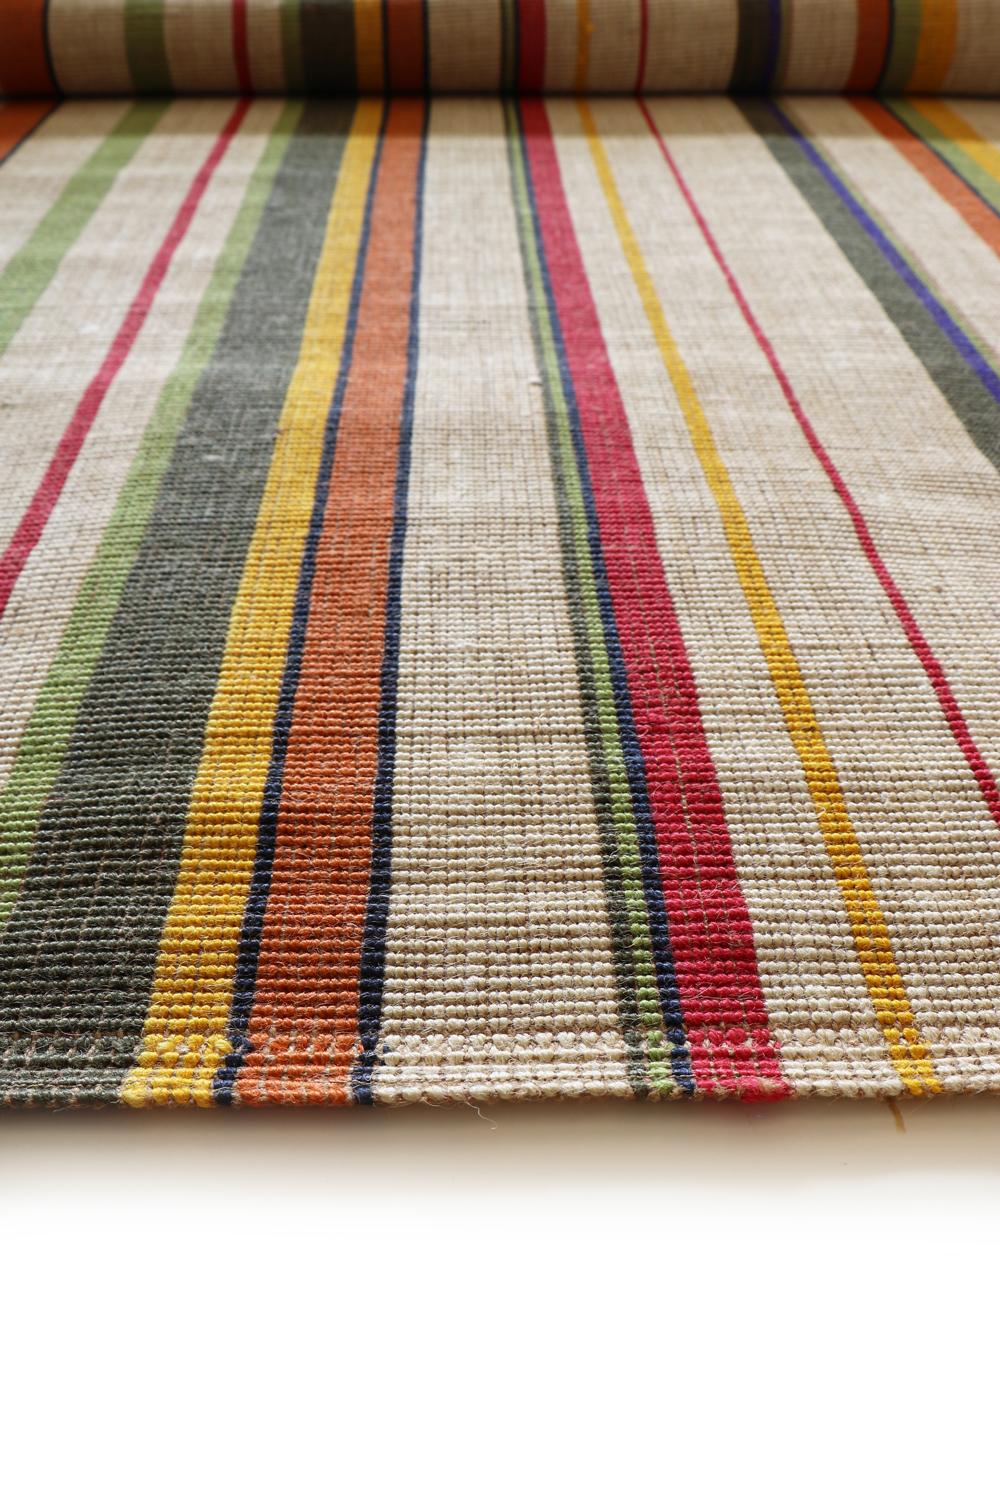 21st Cent Seasonal Style Striped Jute Rug by Deanna Comellini In Stock 200x300cm For Sale 2